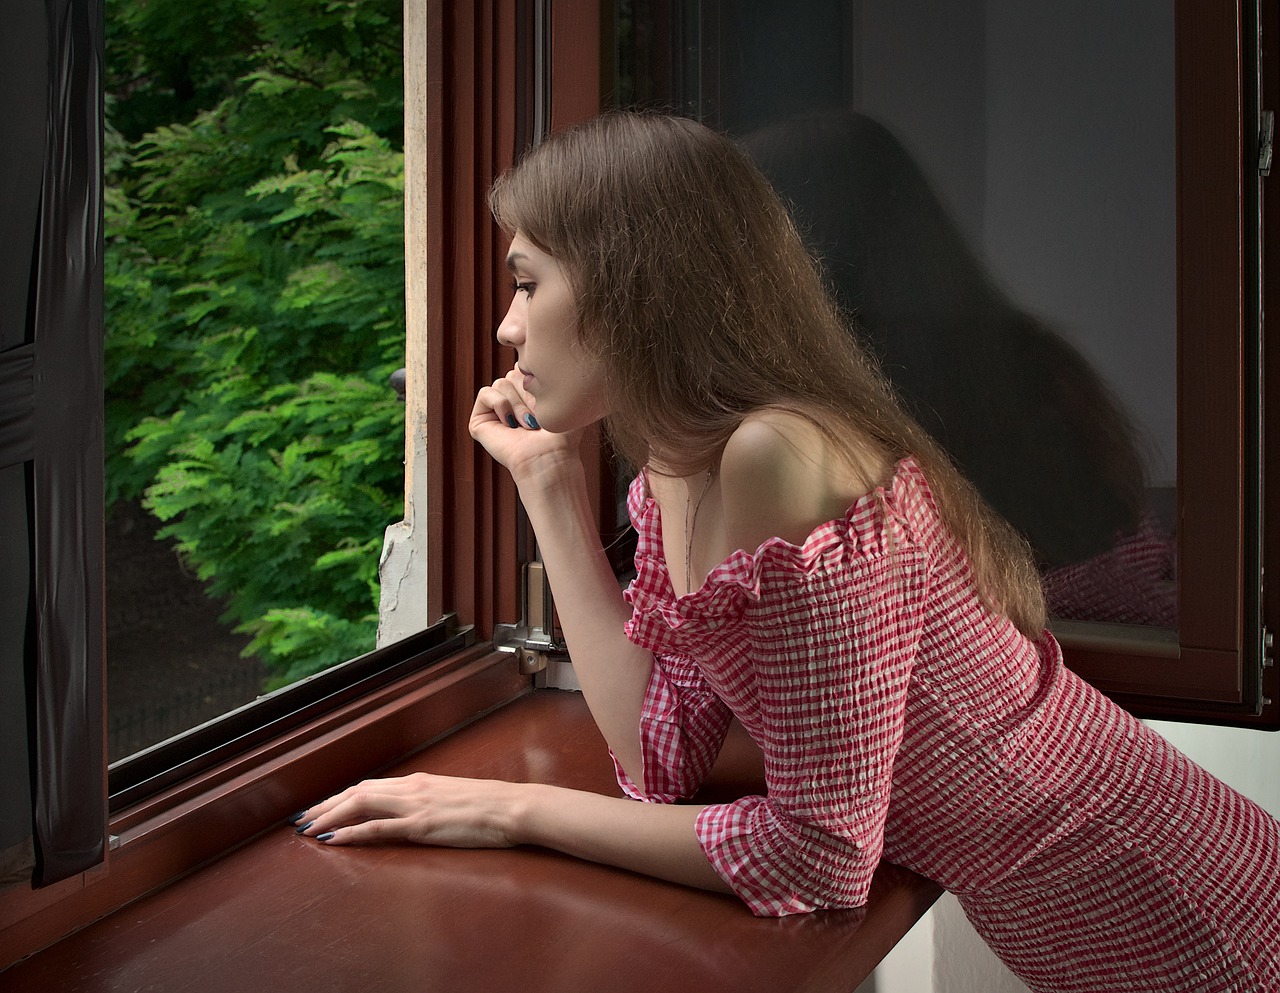 Young woman leaning by the window | Source: Pixabay